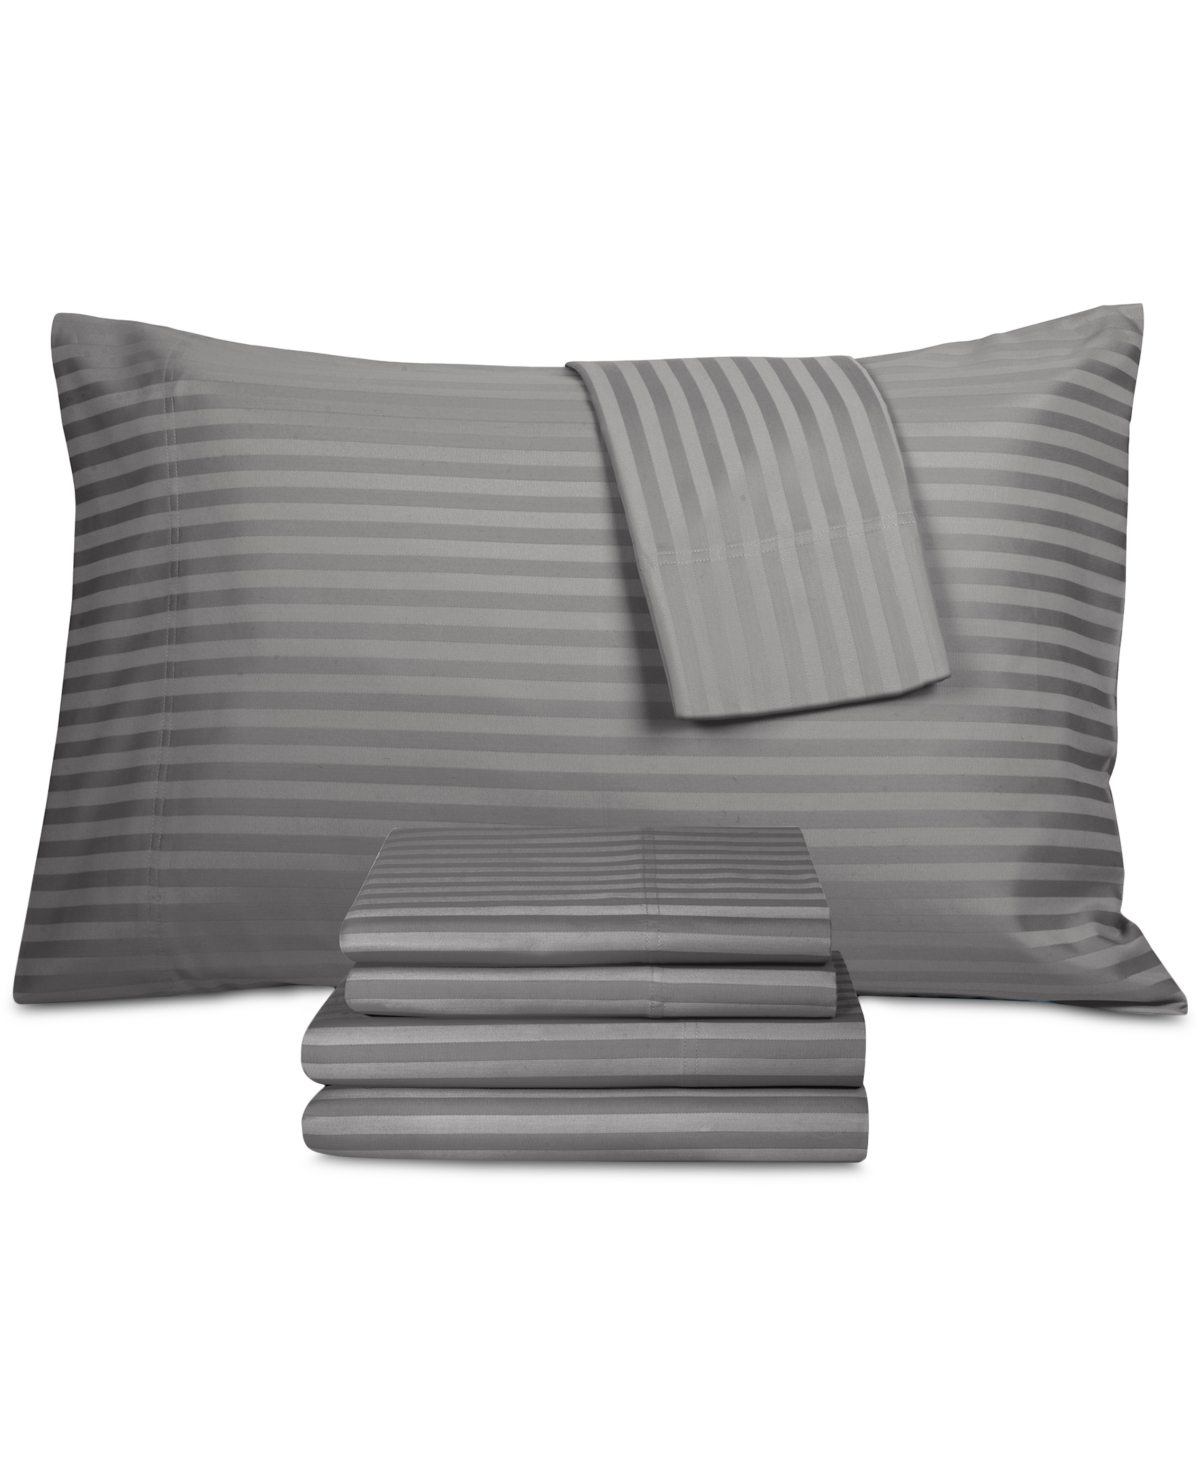 Fairfield Square Collection Brookline Woven Stripe 1400-thread Count 6-pc. Sheet Set, King In Grey